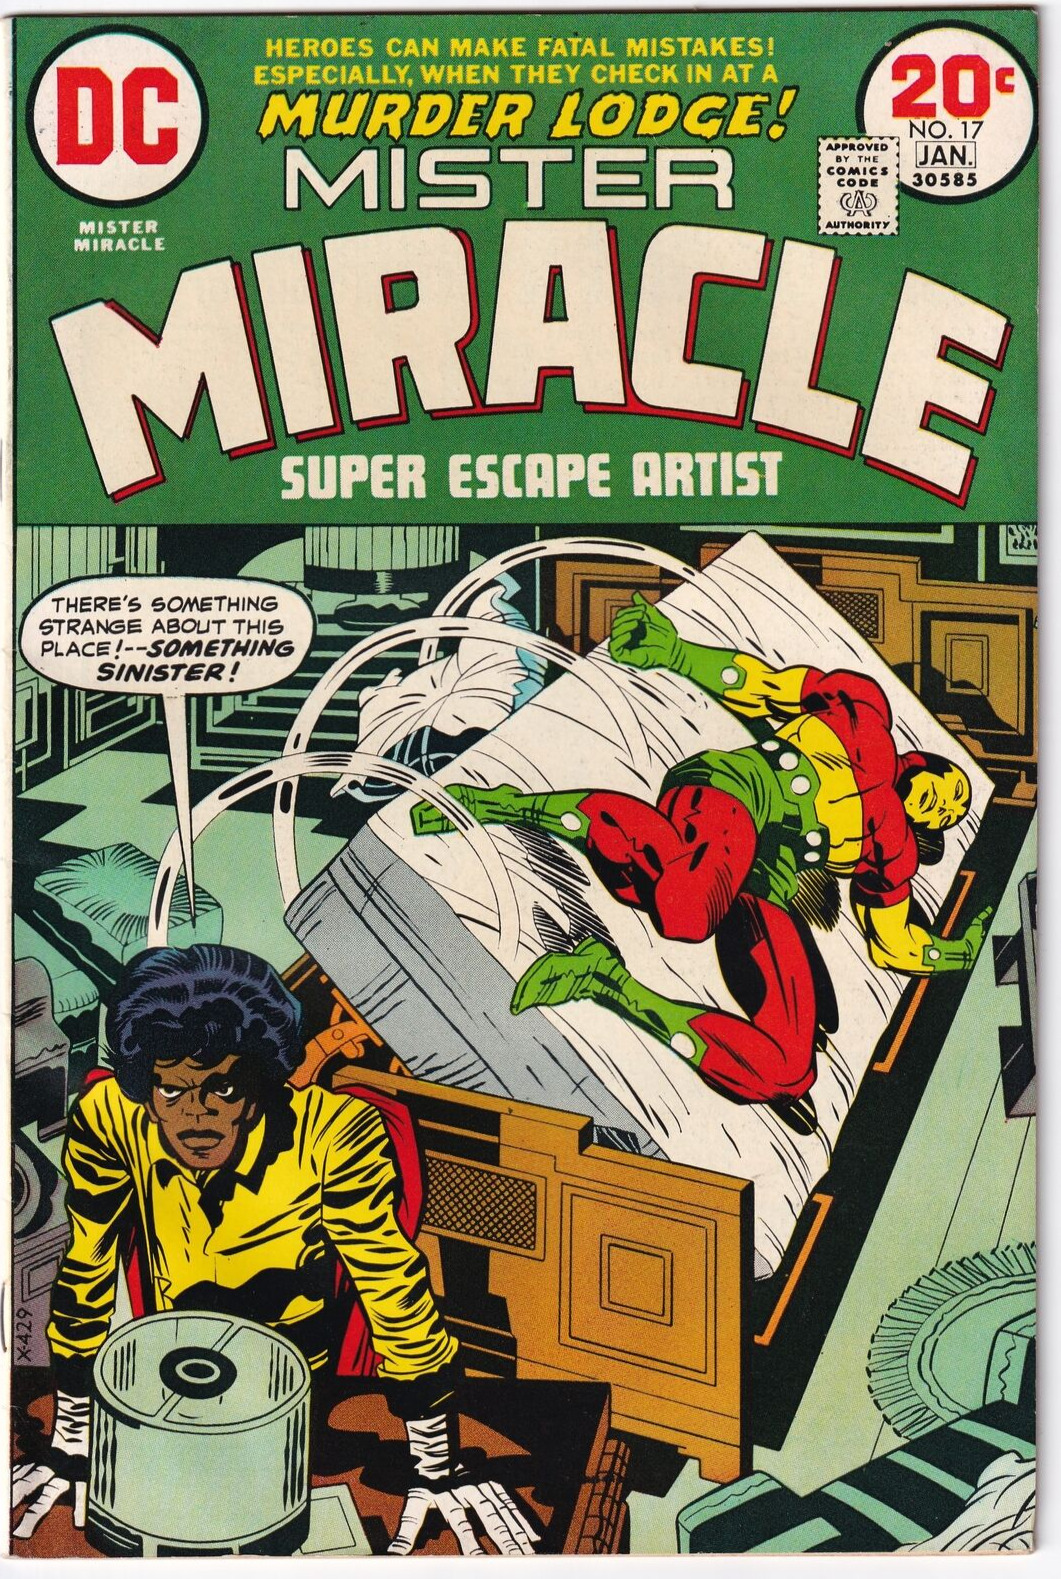 Mister Miracle #17 (DC, 1973)  High Quality Scans.